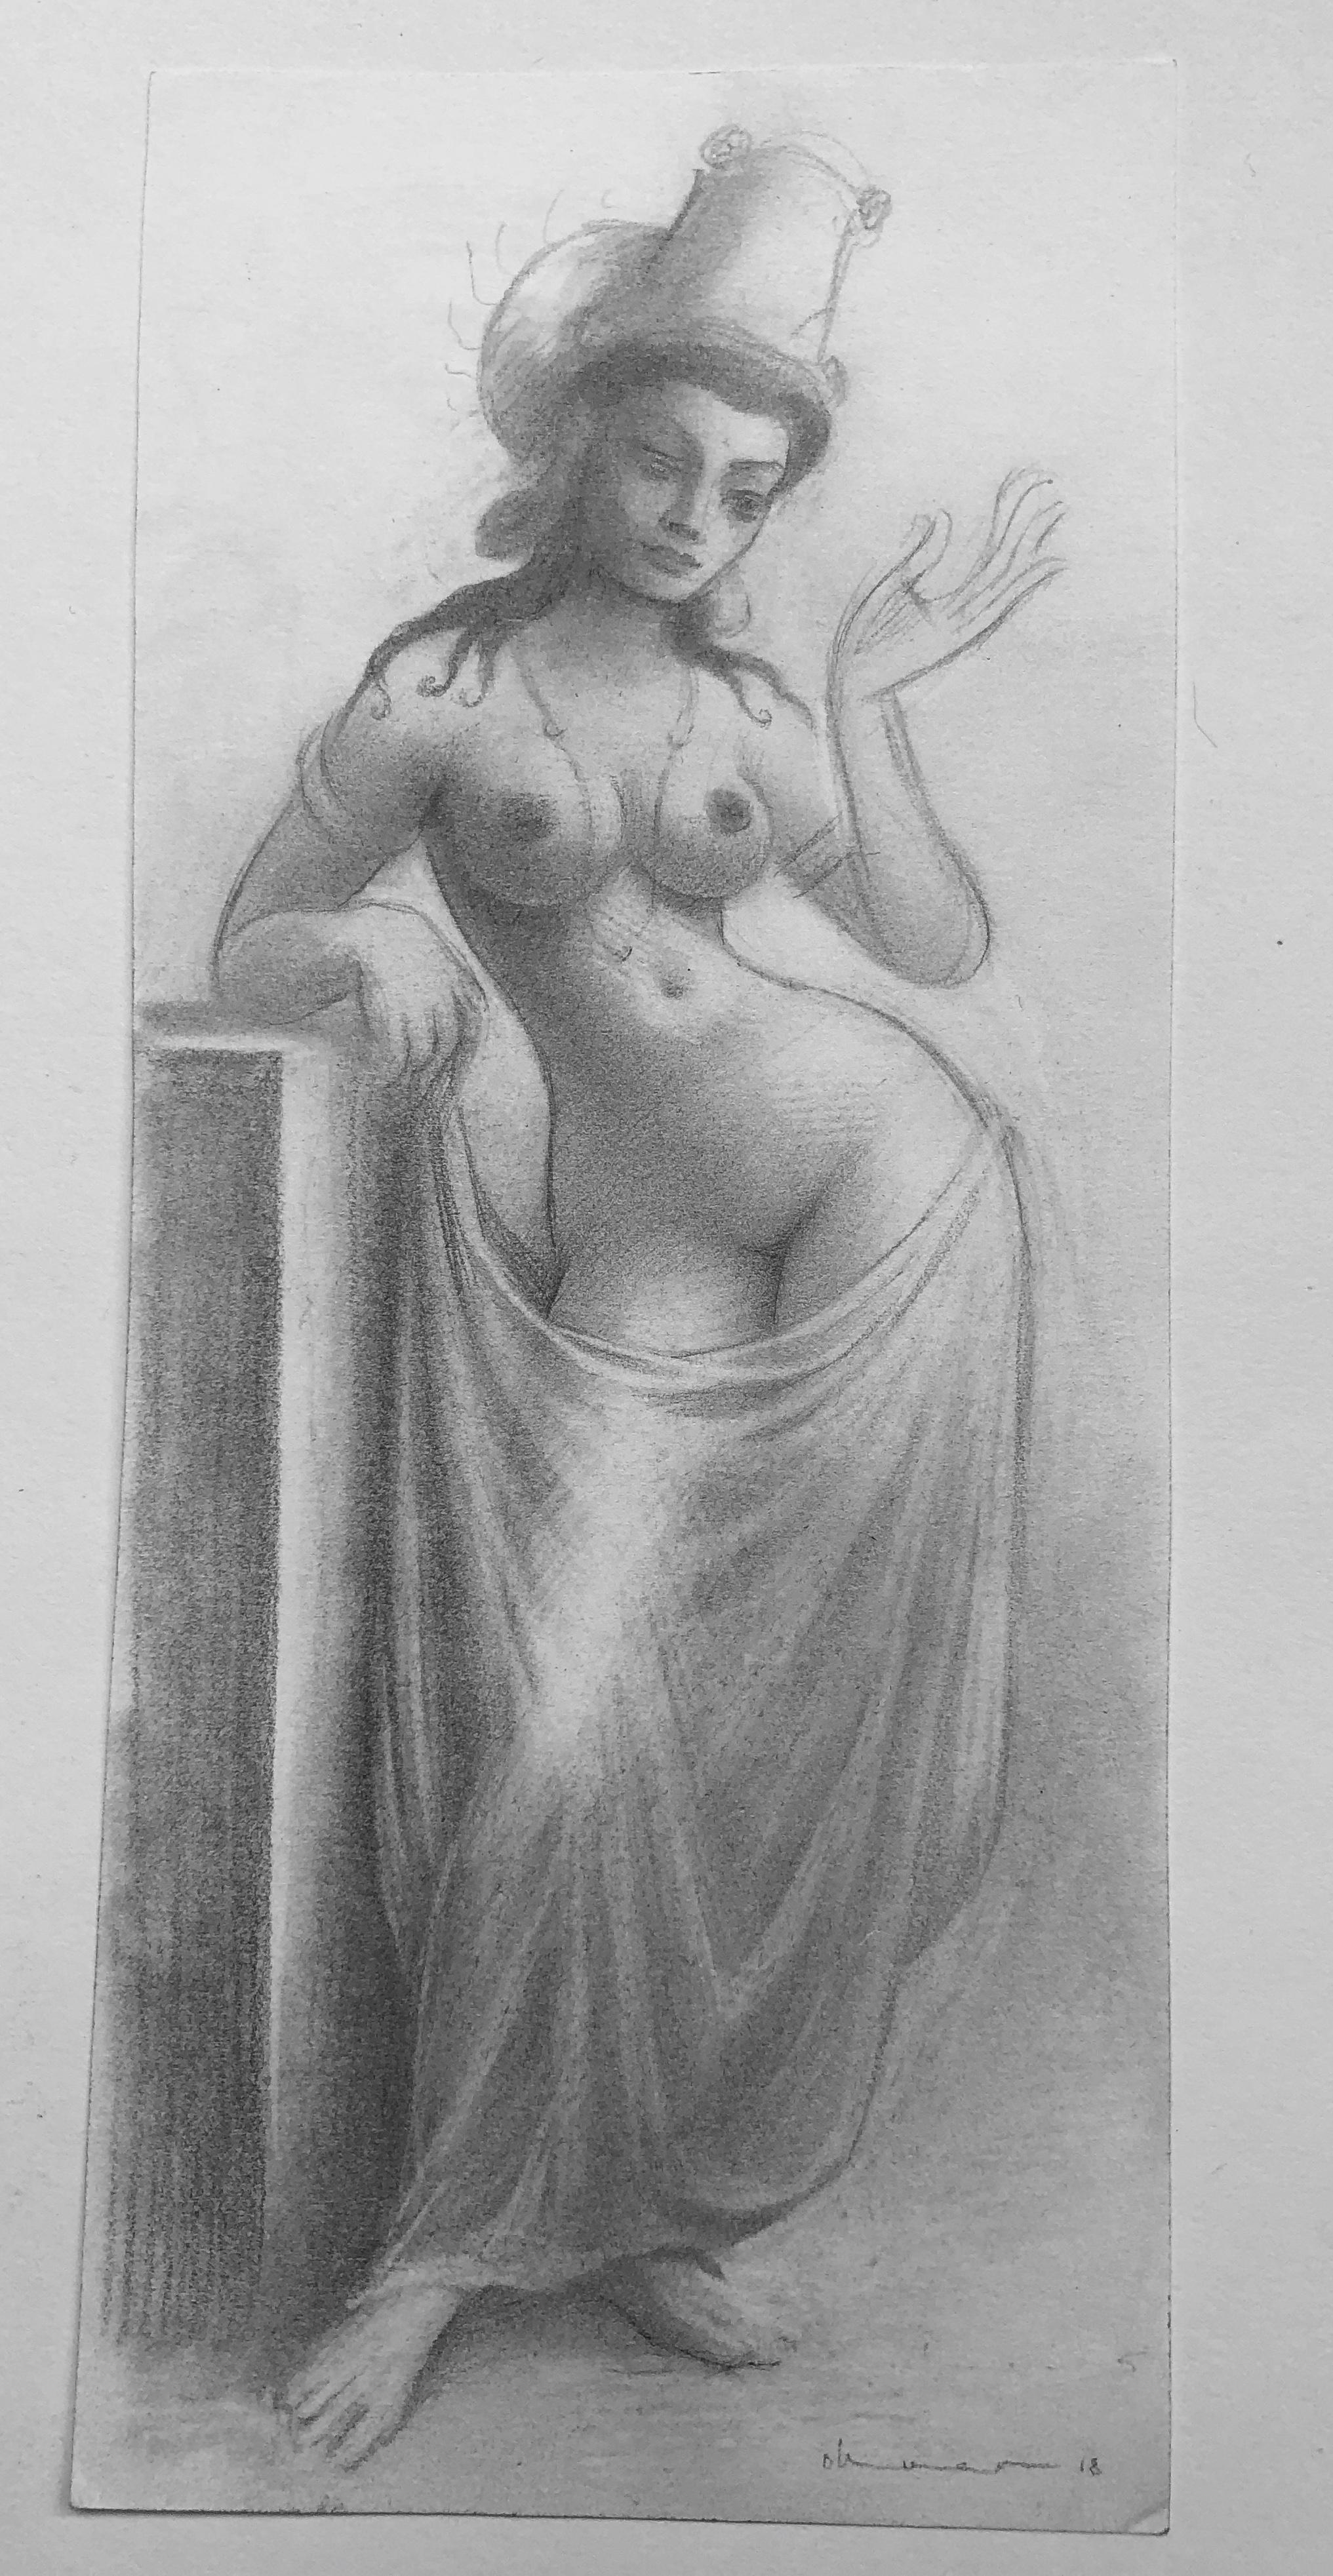 Oliver Hazard Figurative Art - Maid of Agora - Nude Female Figure, Highly Detailed Pencil Drawing, Framed